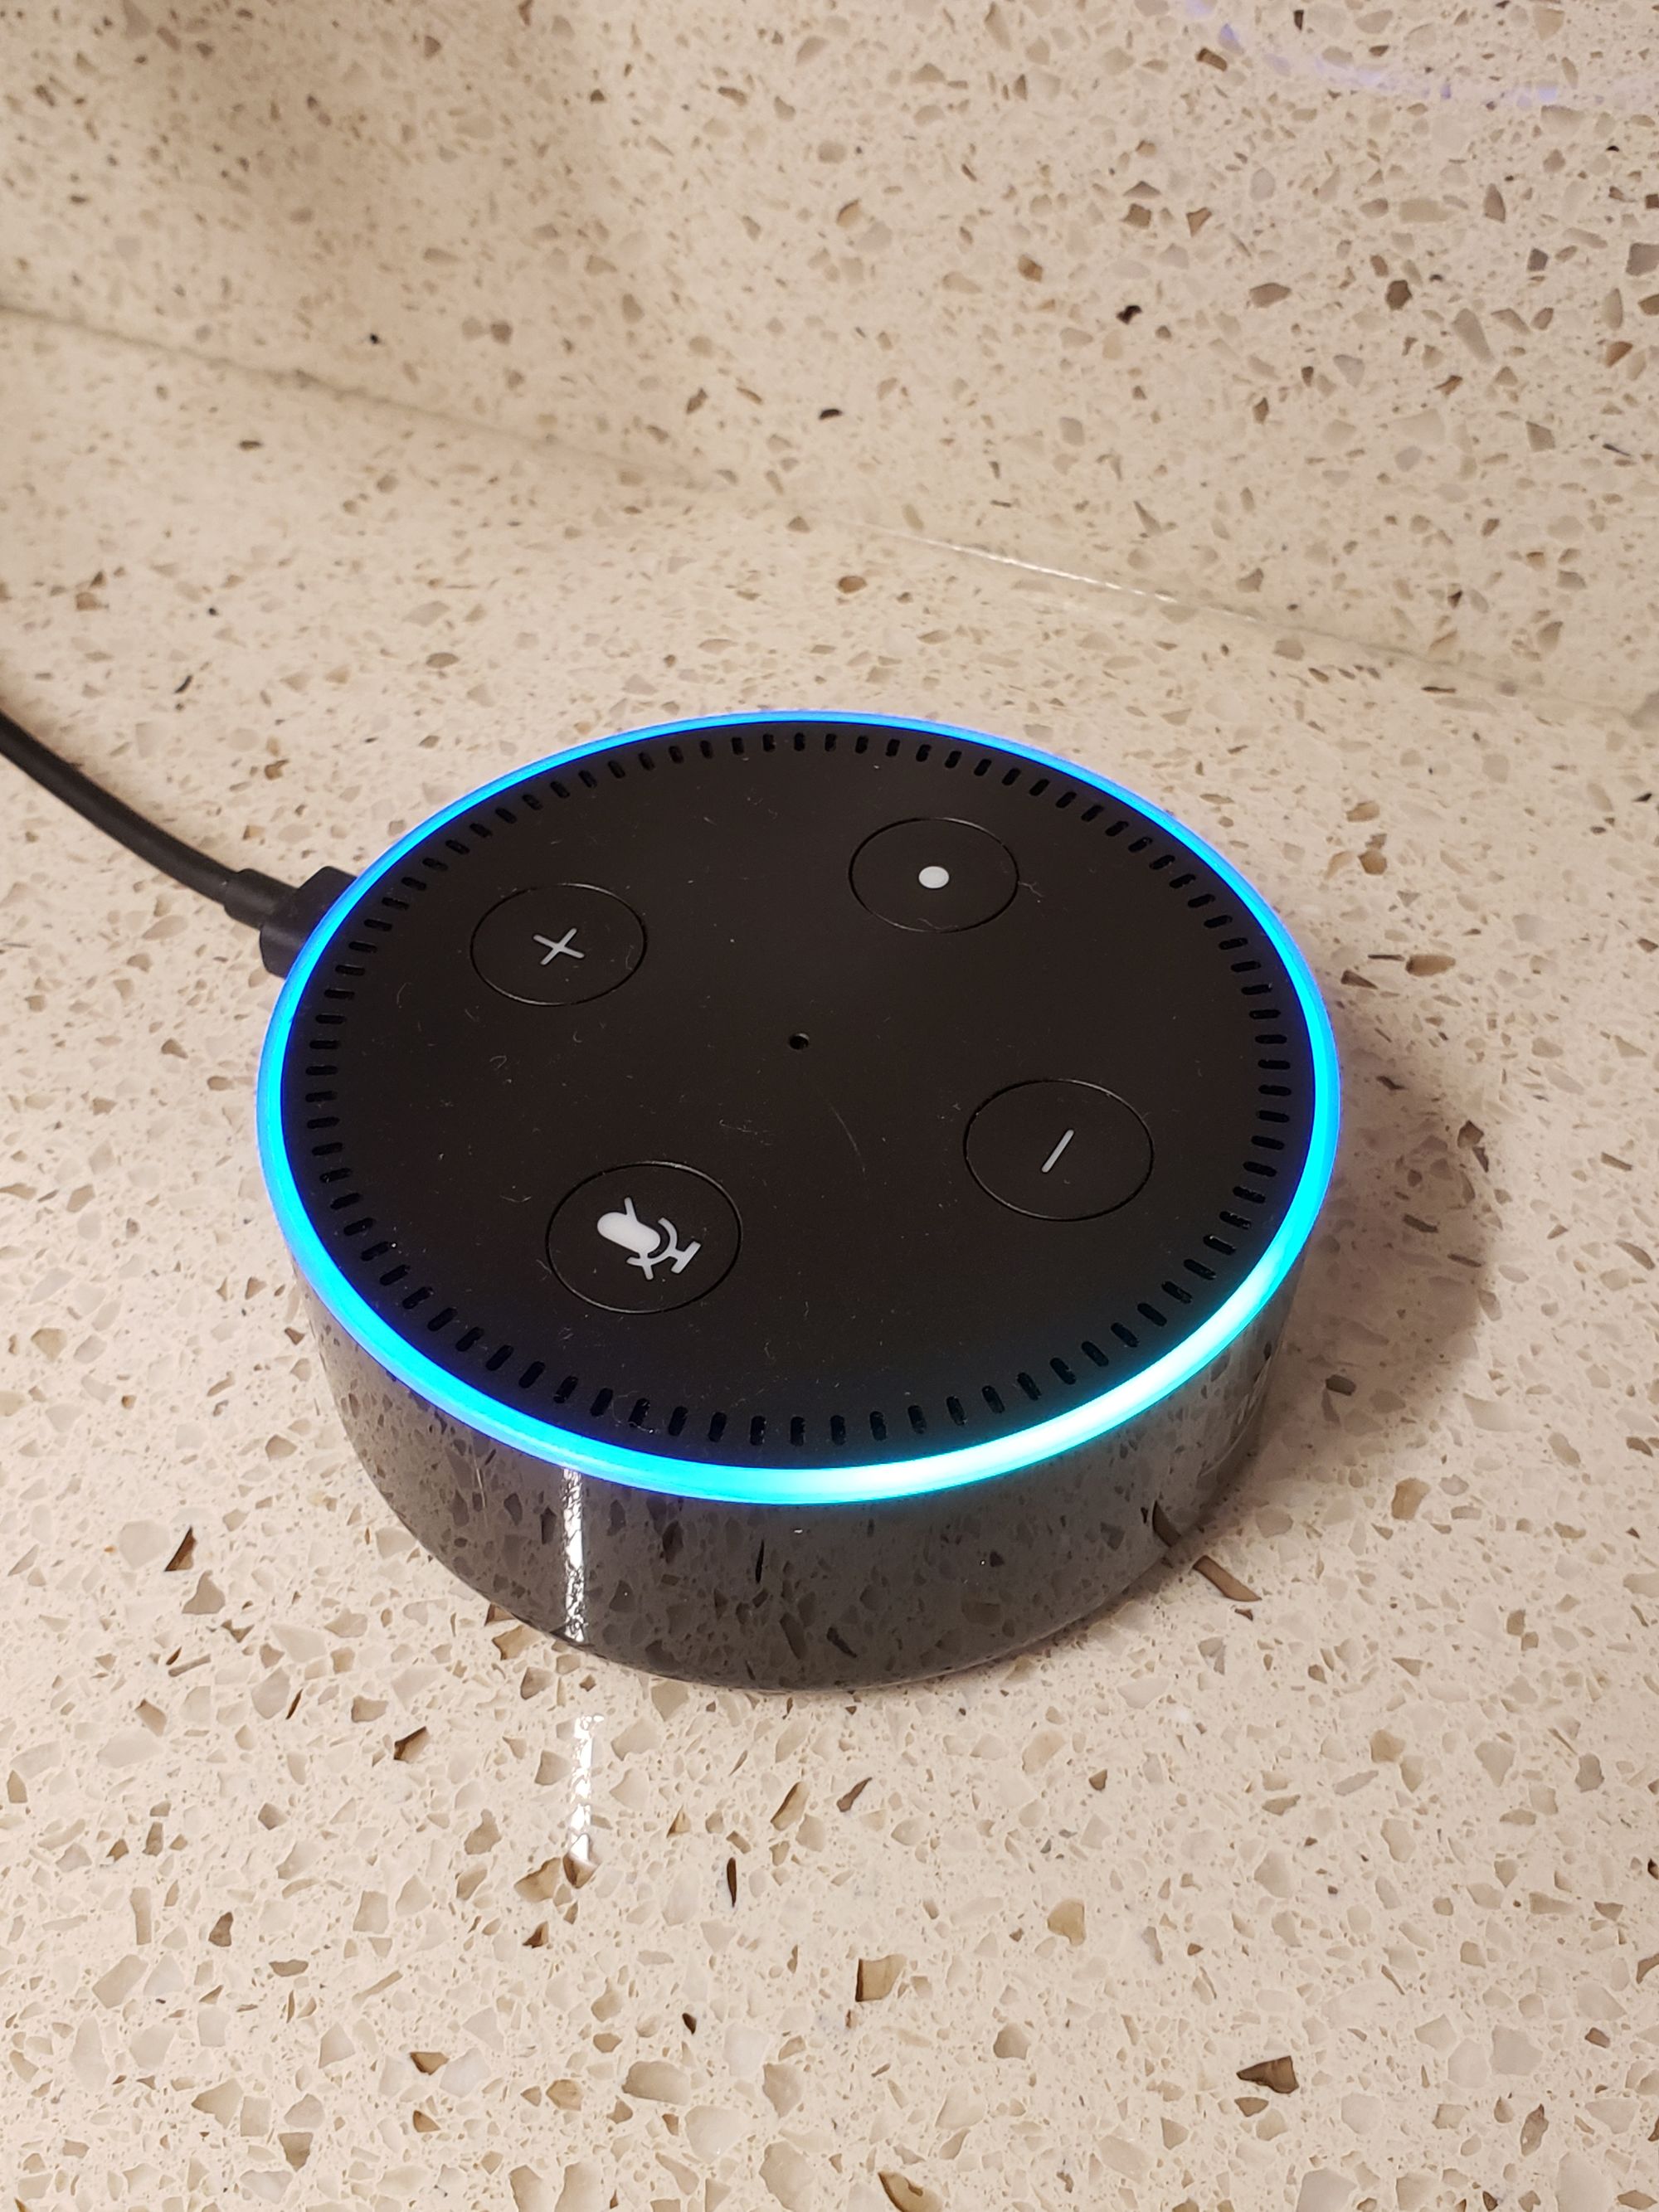 Alexa Voice Commands to Control Home Assistant